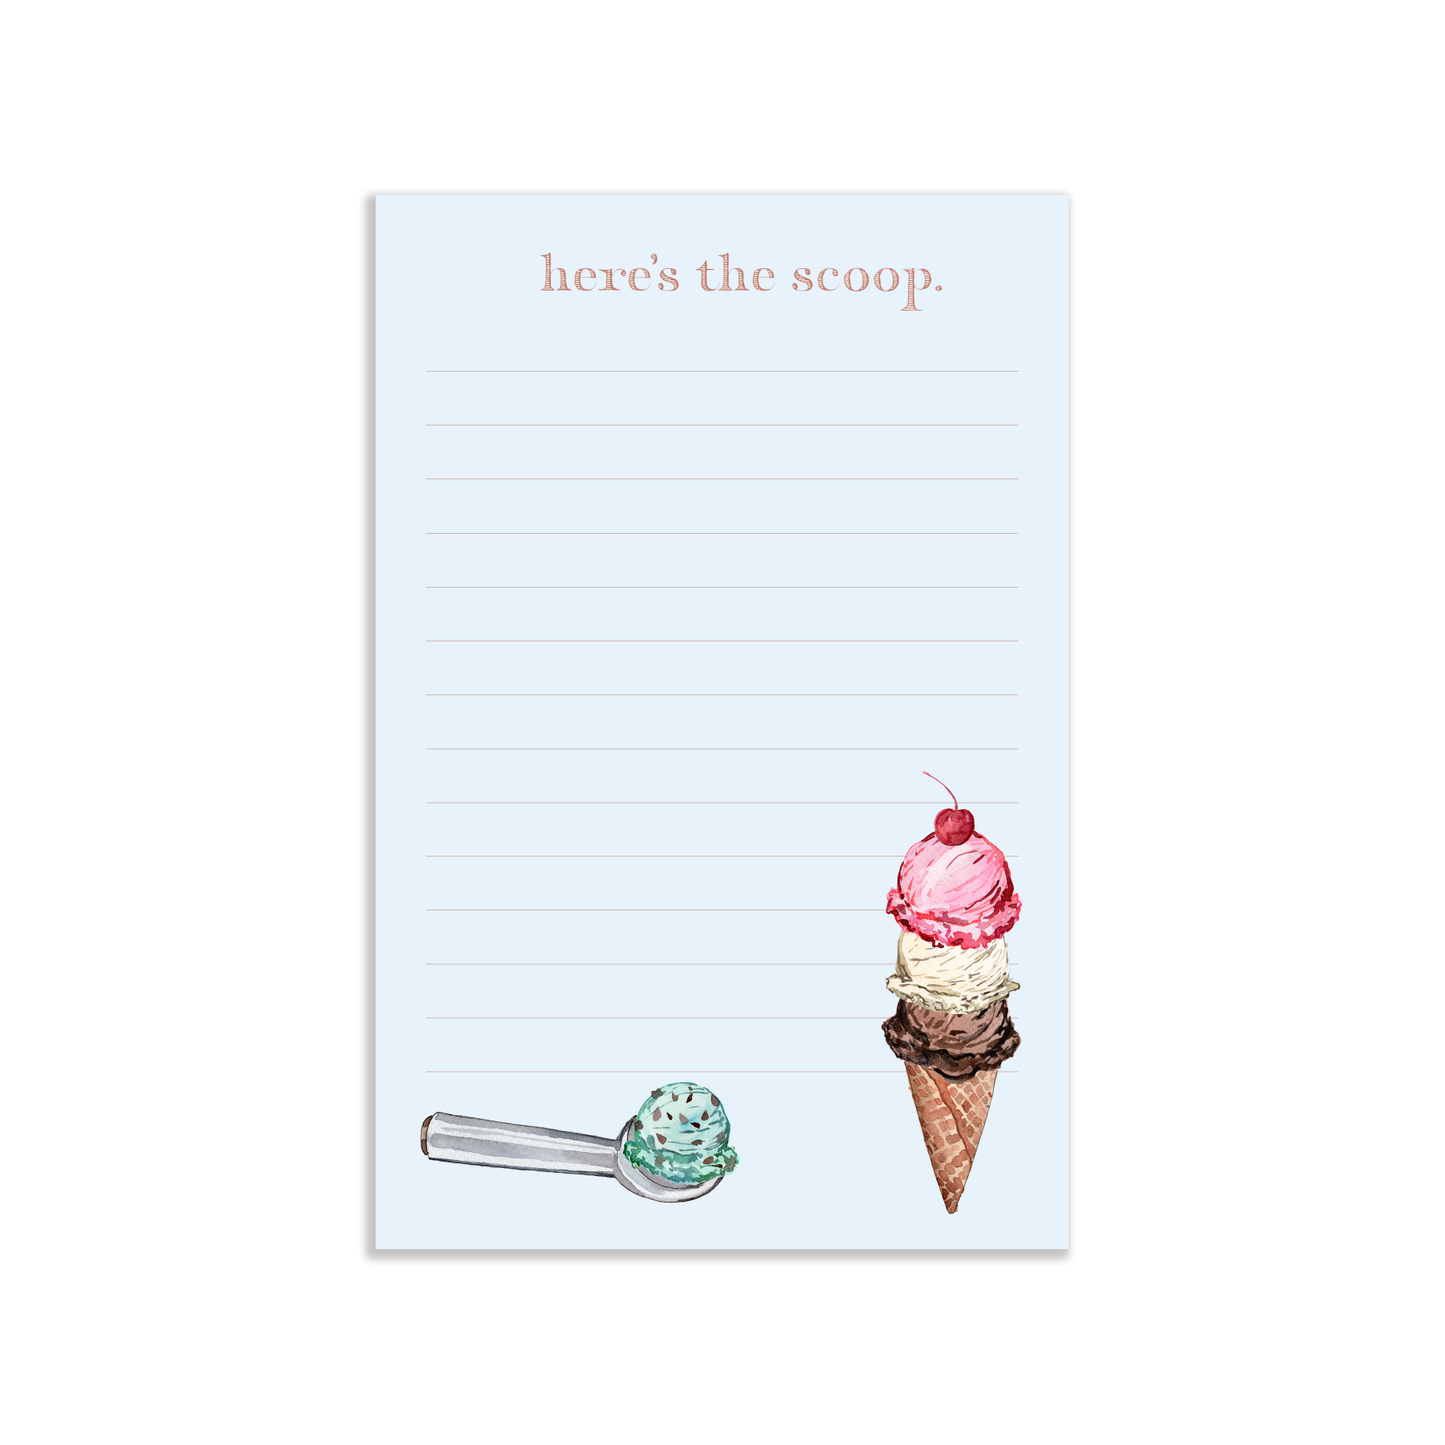 Blue notepad that reads "here's the scoop" at the top and blank lines fill the page. At the bottom is an ice cream scooper with a scoop of mint chocolate chip ice cream in it and in the bottom right corner is 3 scoops (vanilla, chocolate, strawberry) of ice cream in a waffle cone with a cherry on top 